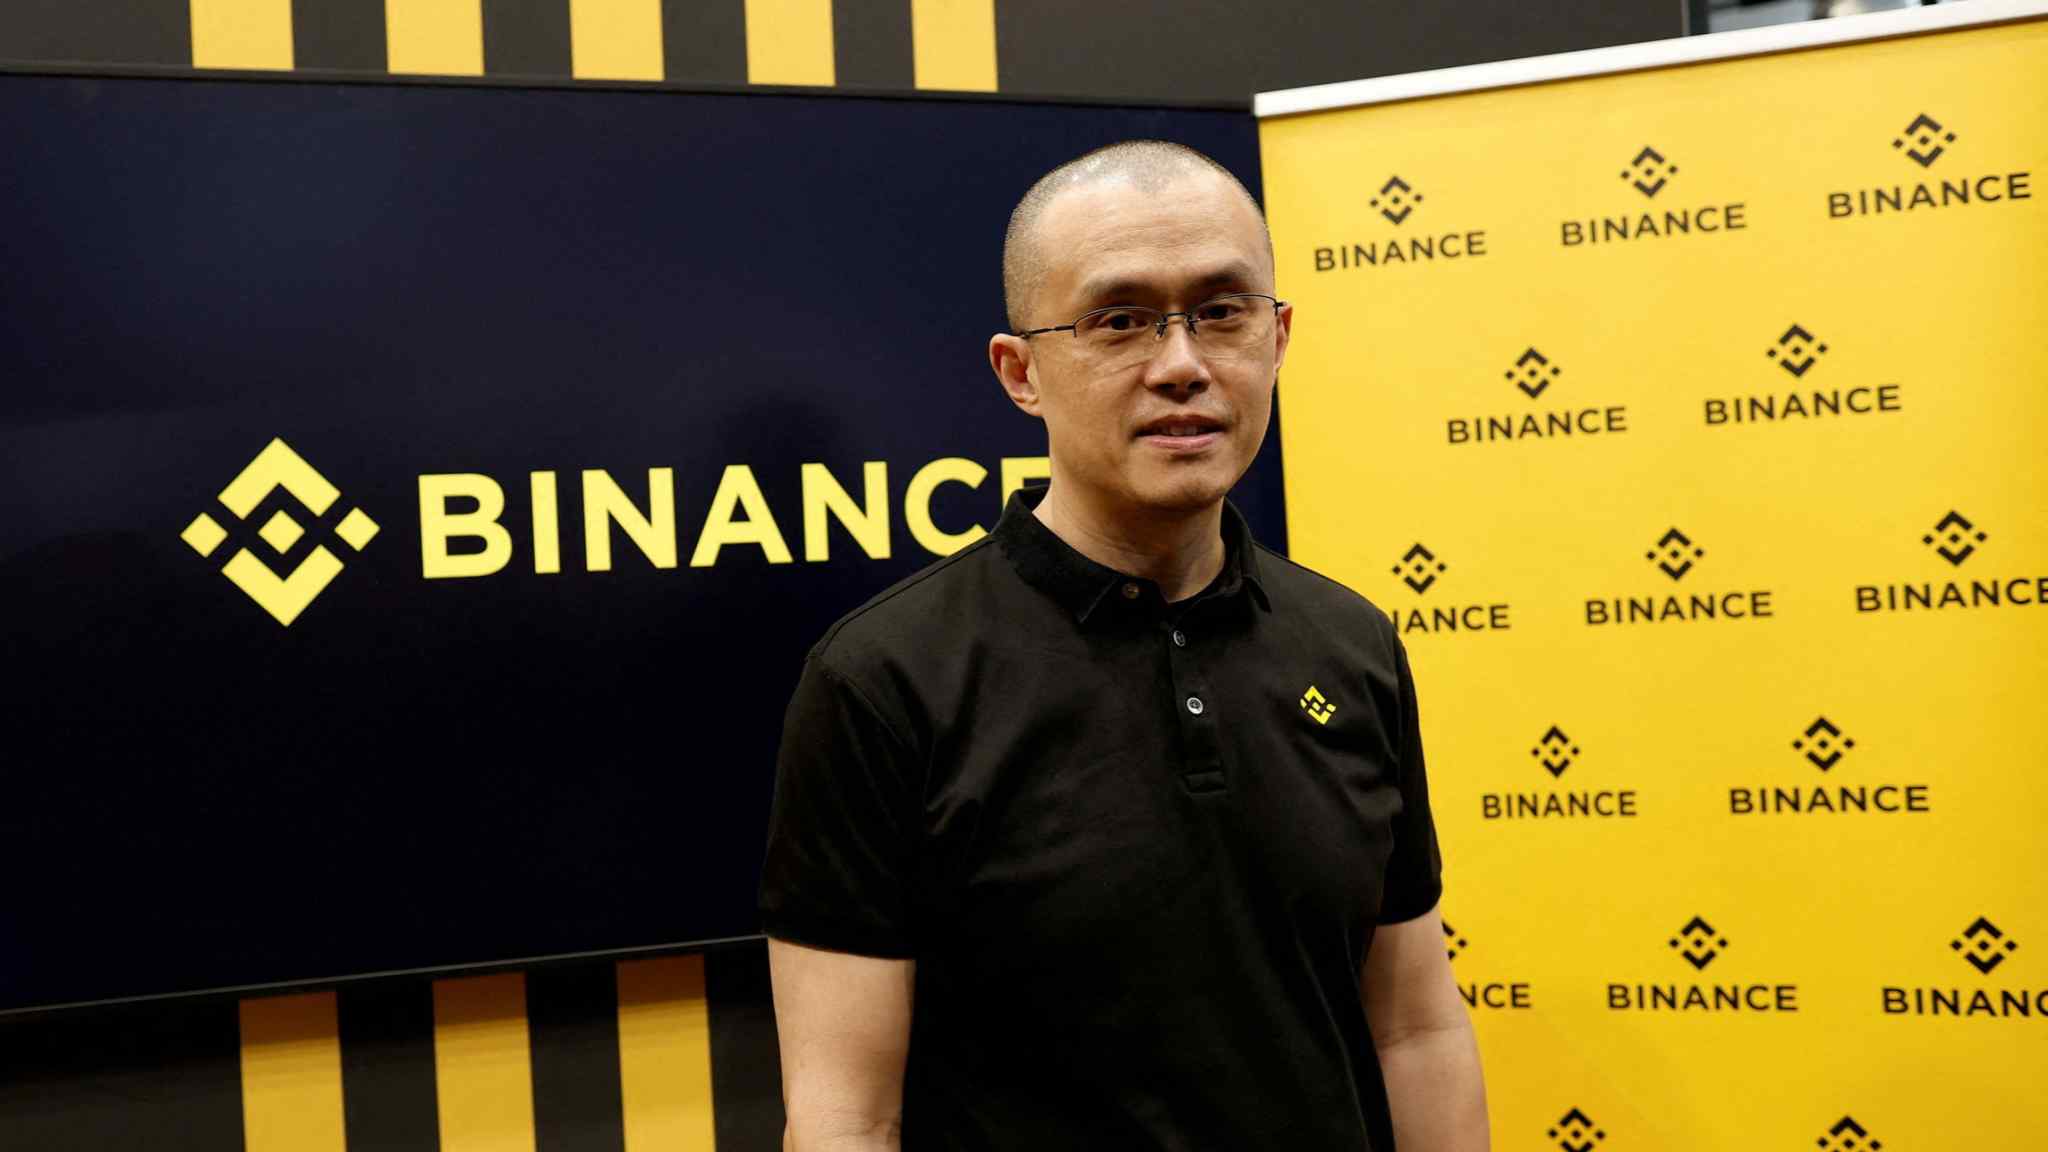 Binance re-enters Japanese crypto market with deal for Sakura